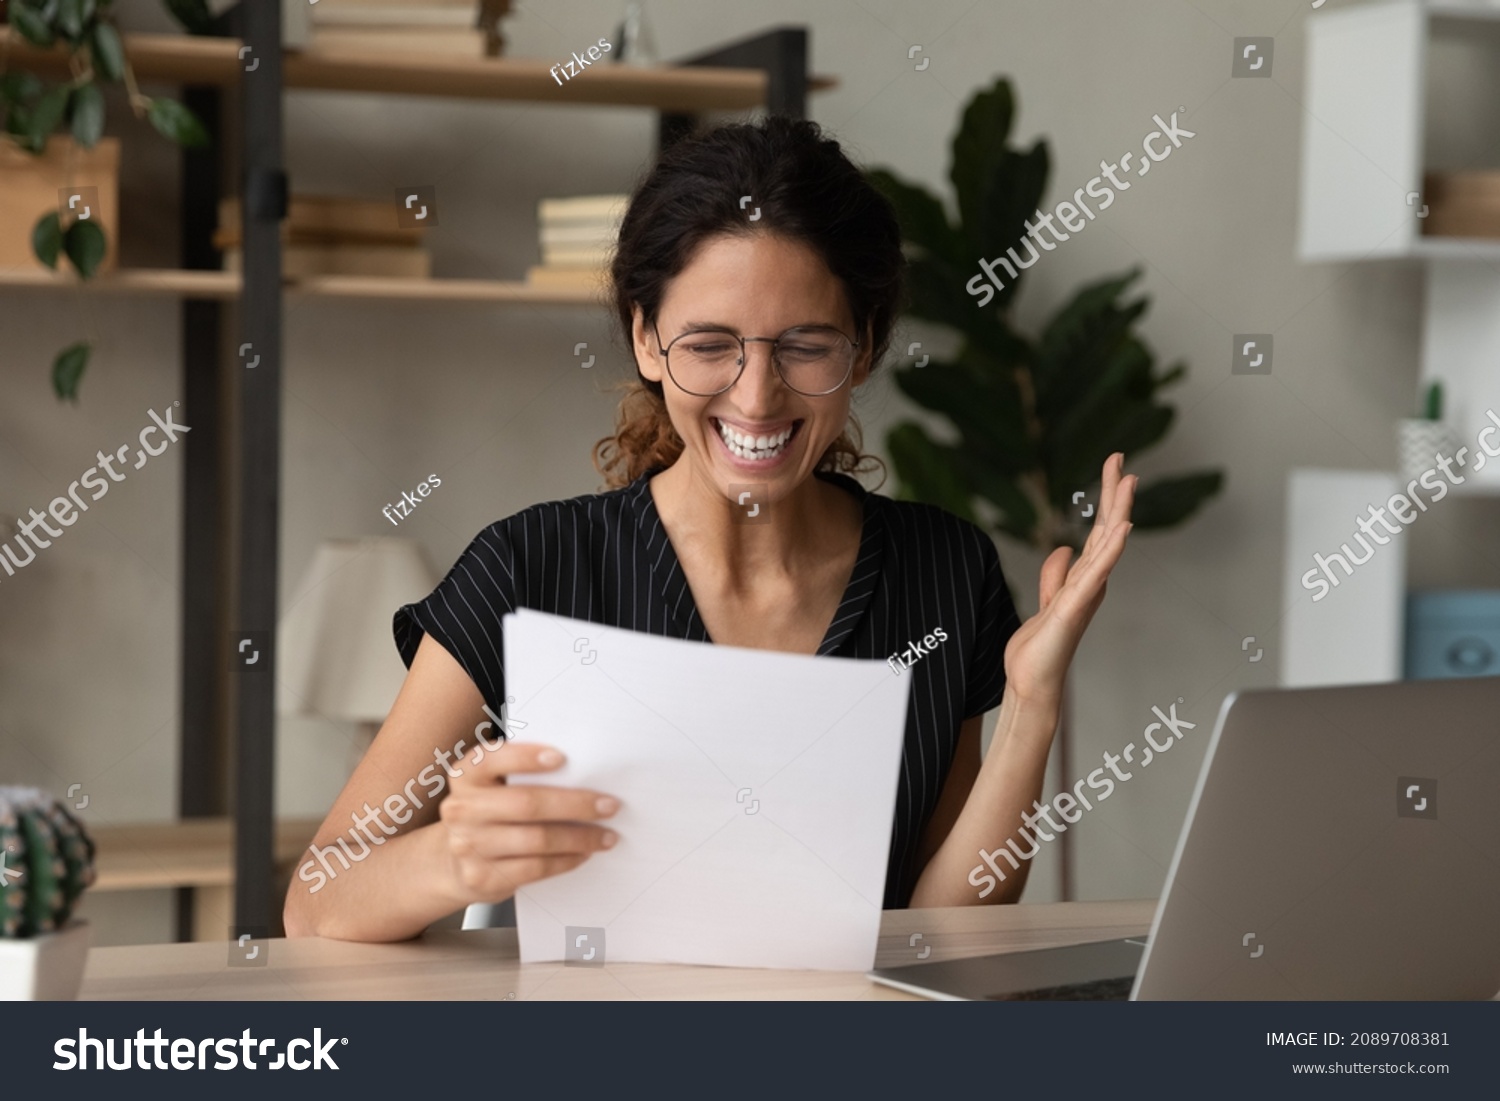 Overjoyed young Hispanic woman feel euphoric read good news in paper letter at home office. Smiling Latino female triumph get promotion offer or notice in paperwork correspondence. Success concept. #2089708381